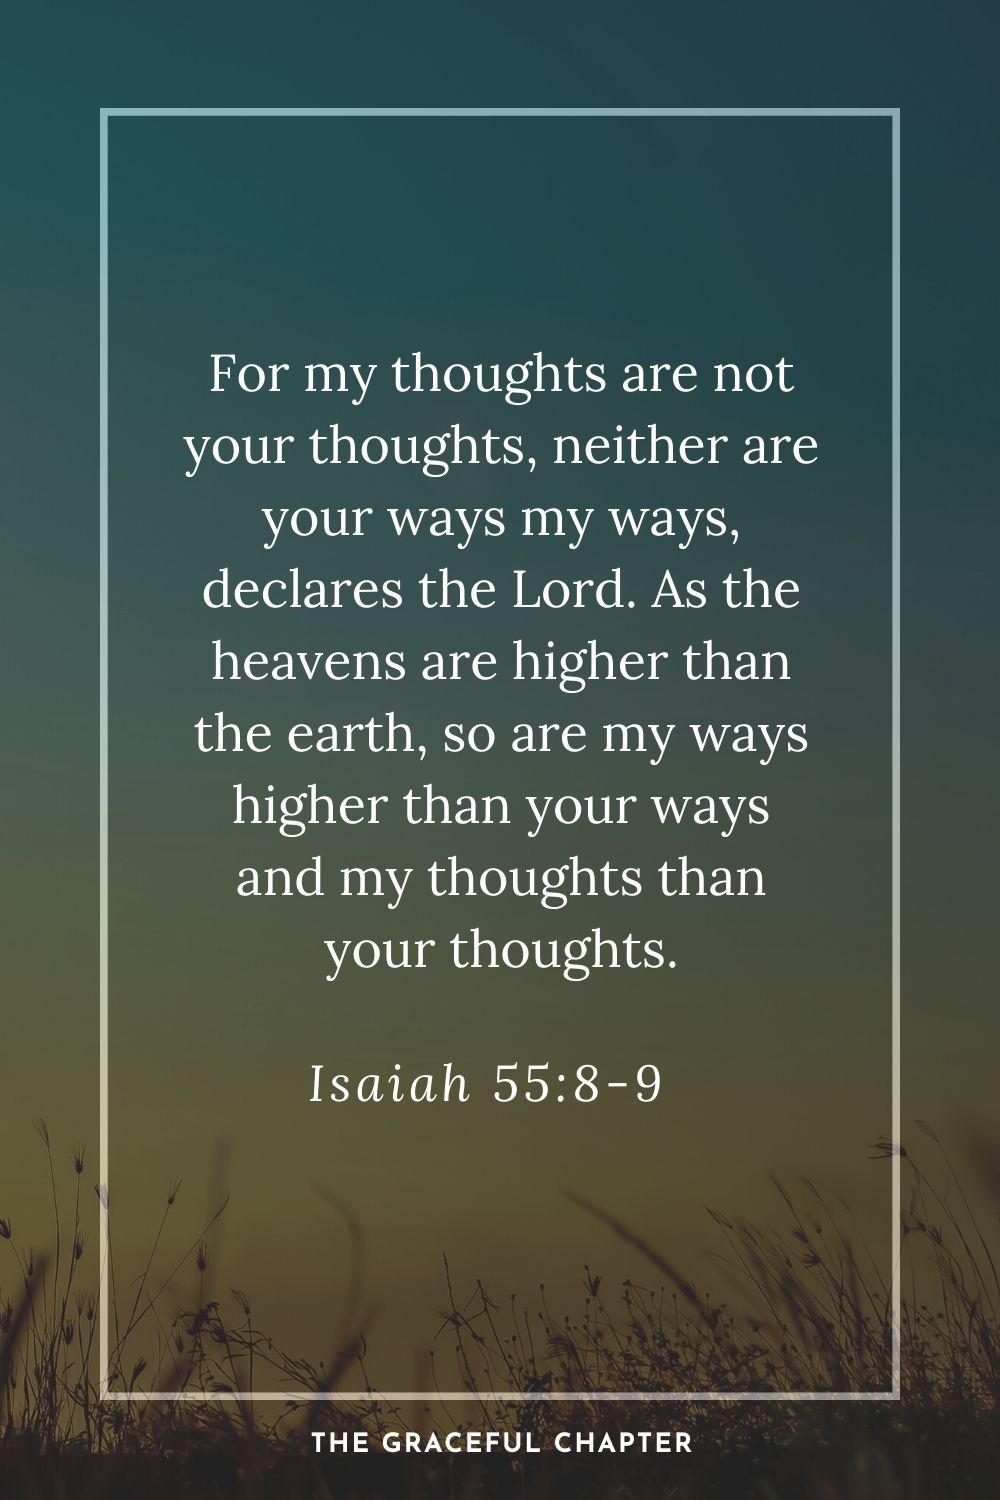 For my thoughts are not your thoughts, neither are your ways my ways, declares the Lord. As the heavens are higher than the earth, so are my ways higher than your ways and my thoughts than your thoughts. Isaiah 55:8-9